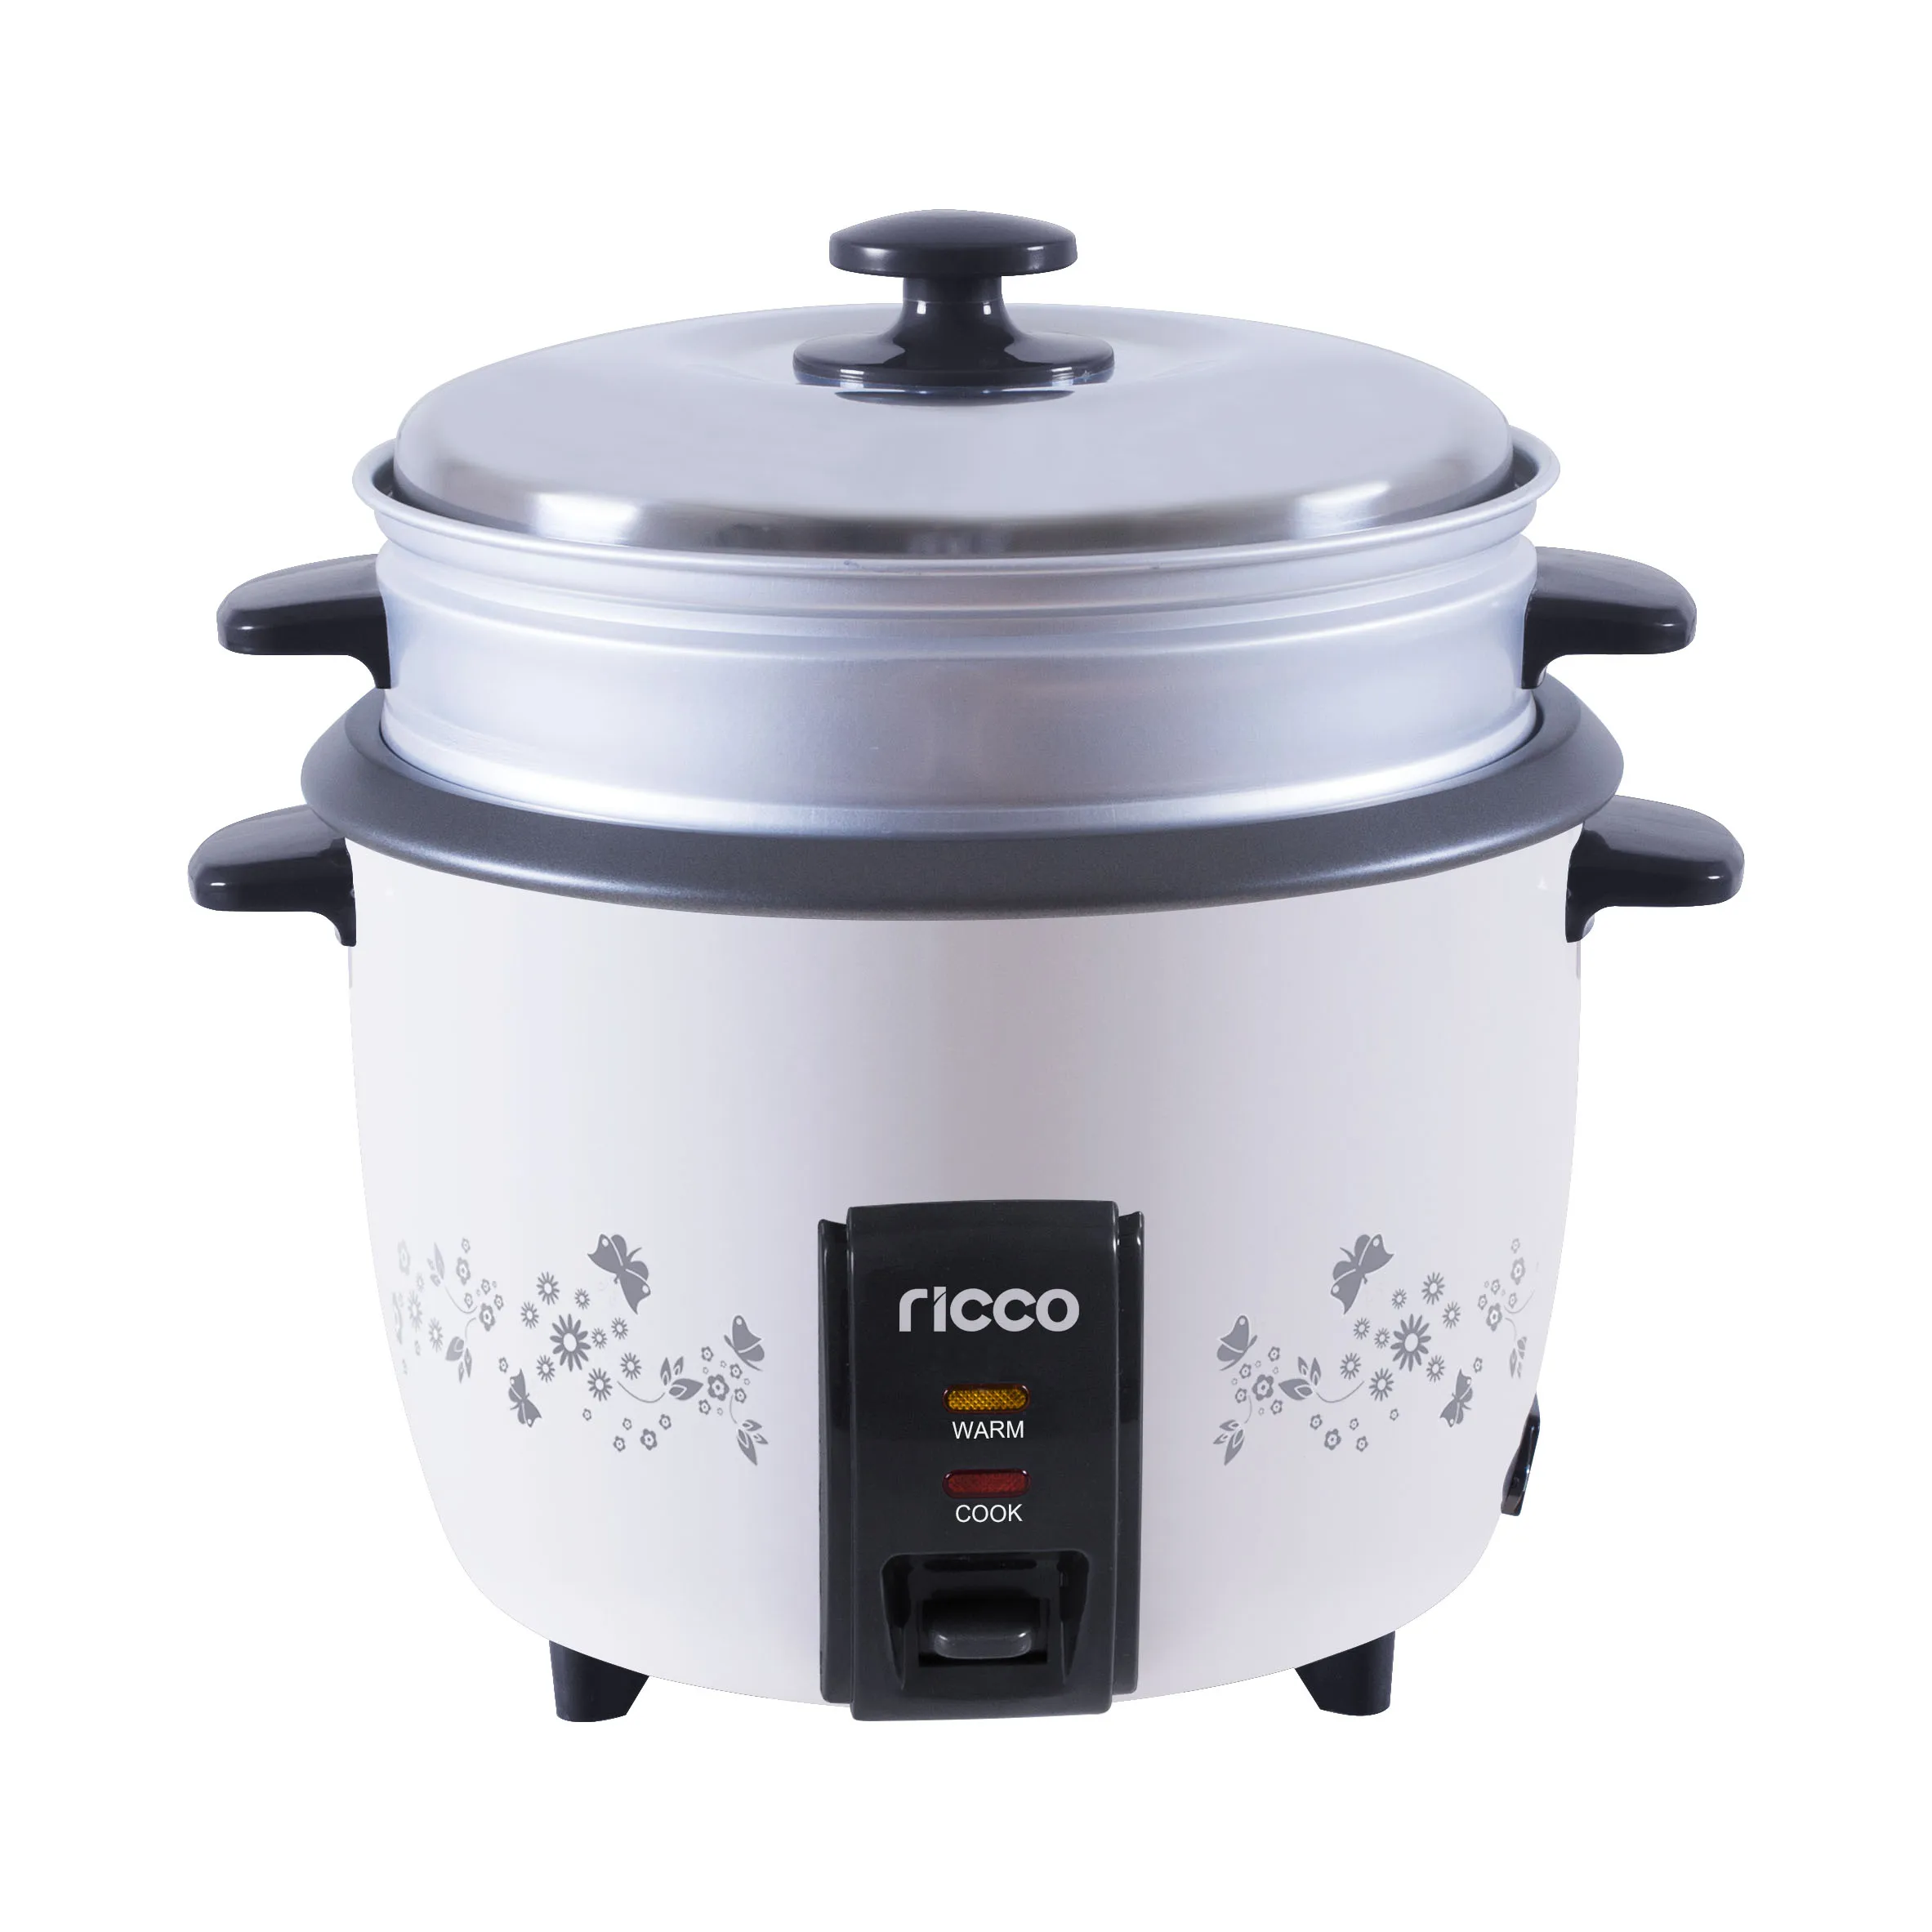 Rice Cooker Small 1-1.5 Cups Uncooked(3 Cups Cooked), Mini Rice 0.3L-White